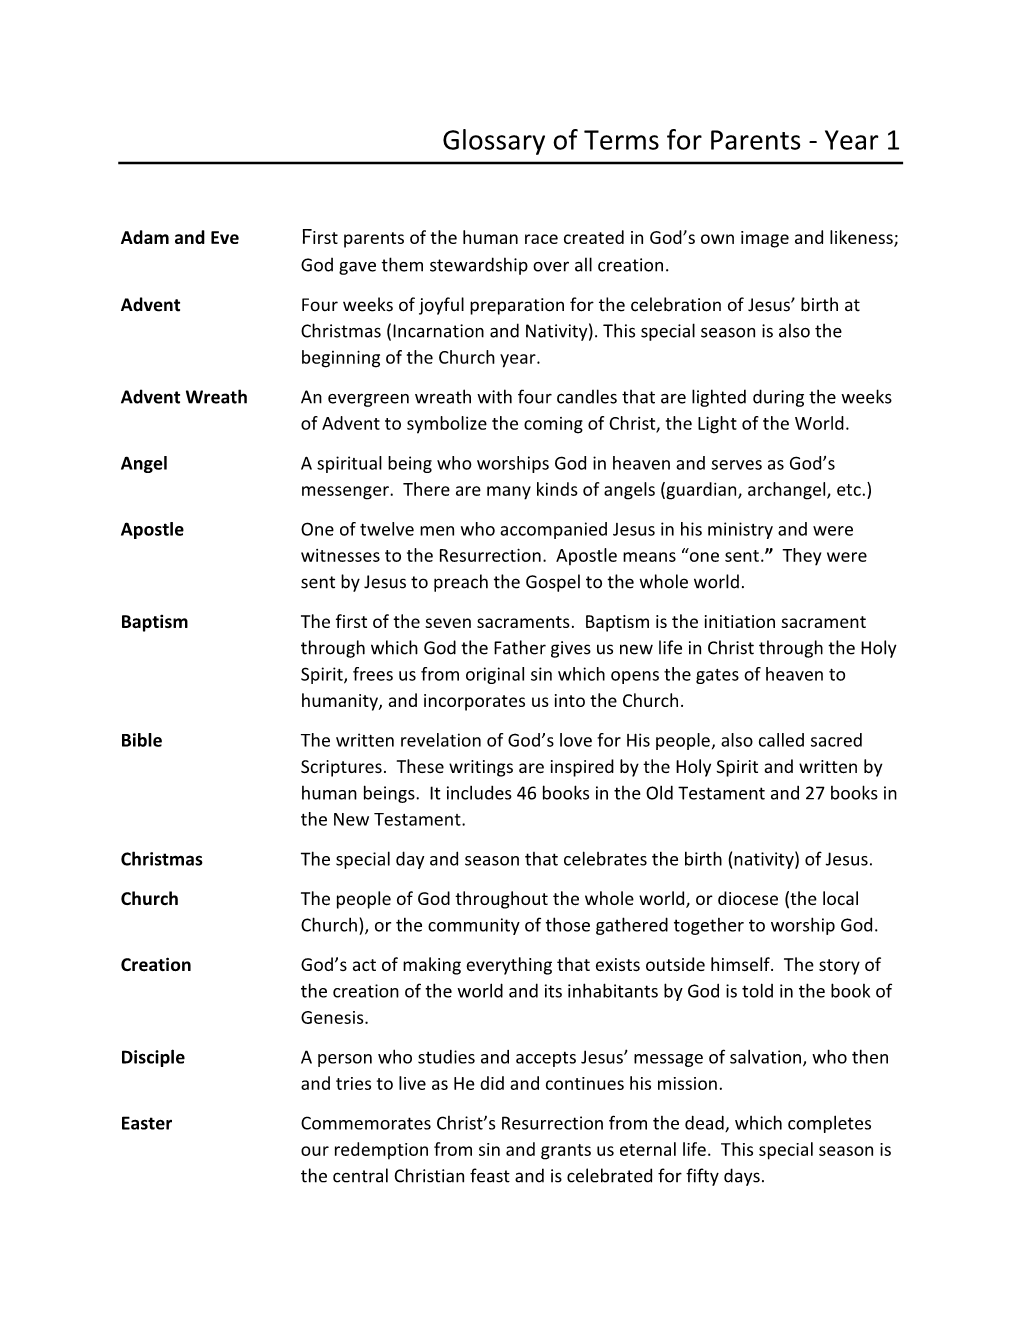 Glossary of Terms for Parents - Year 1